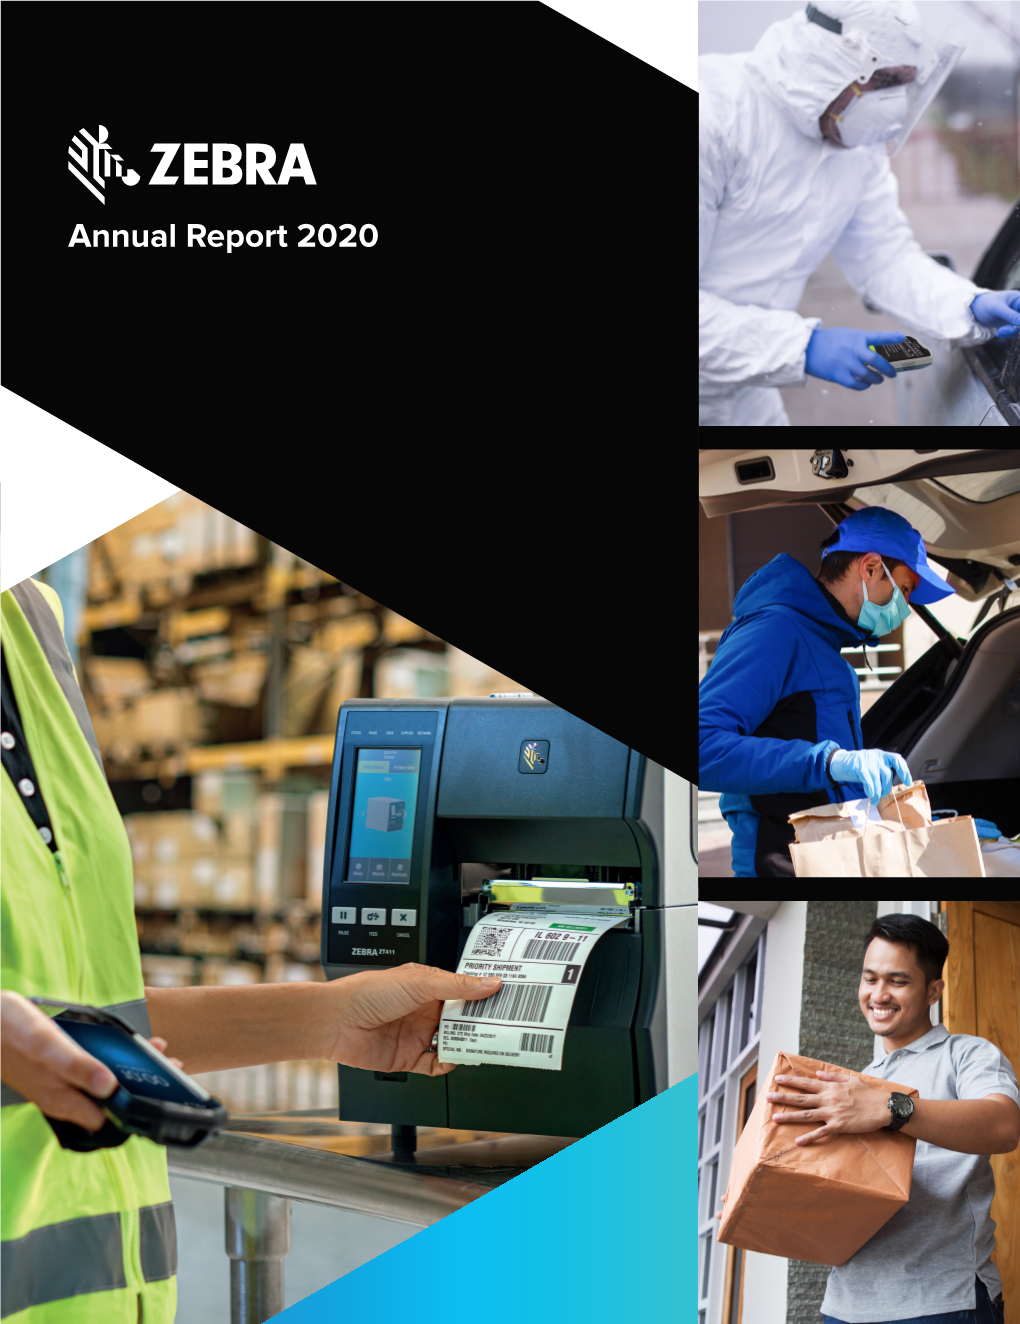 Annual Report 2020 to Our Investors, I Am Proud of Our Employees’ Resiliency and Focus on Driving Our Business Forward During the Pandemic